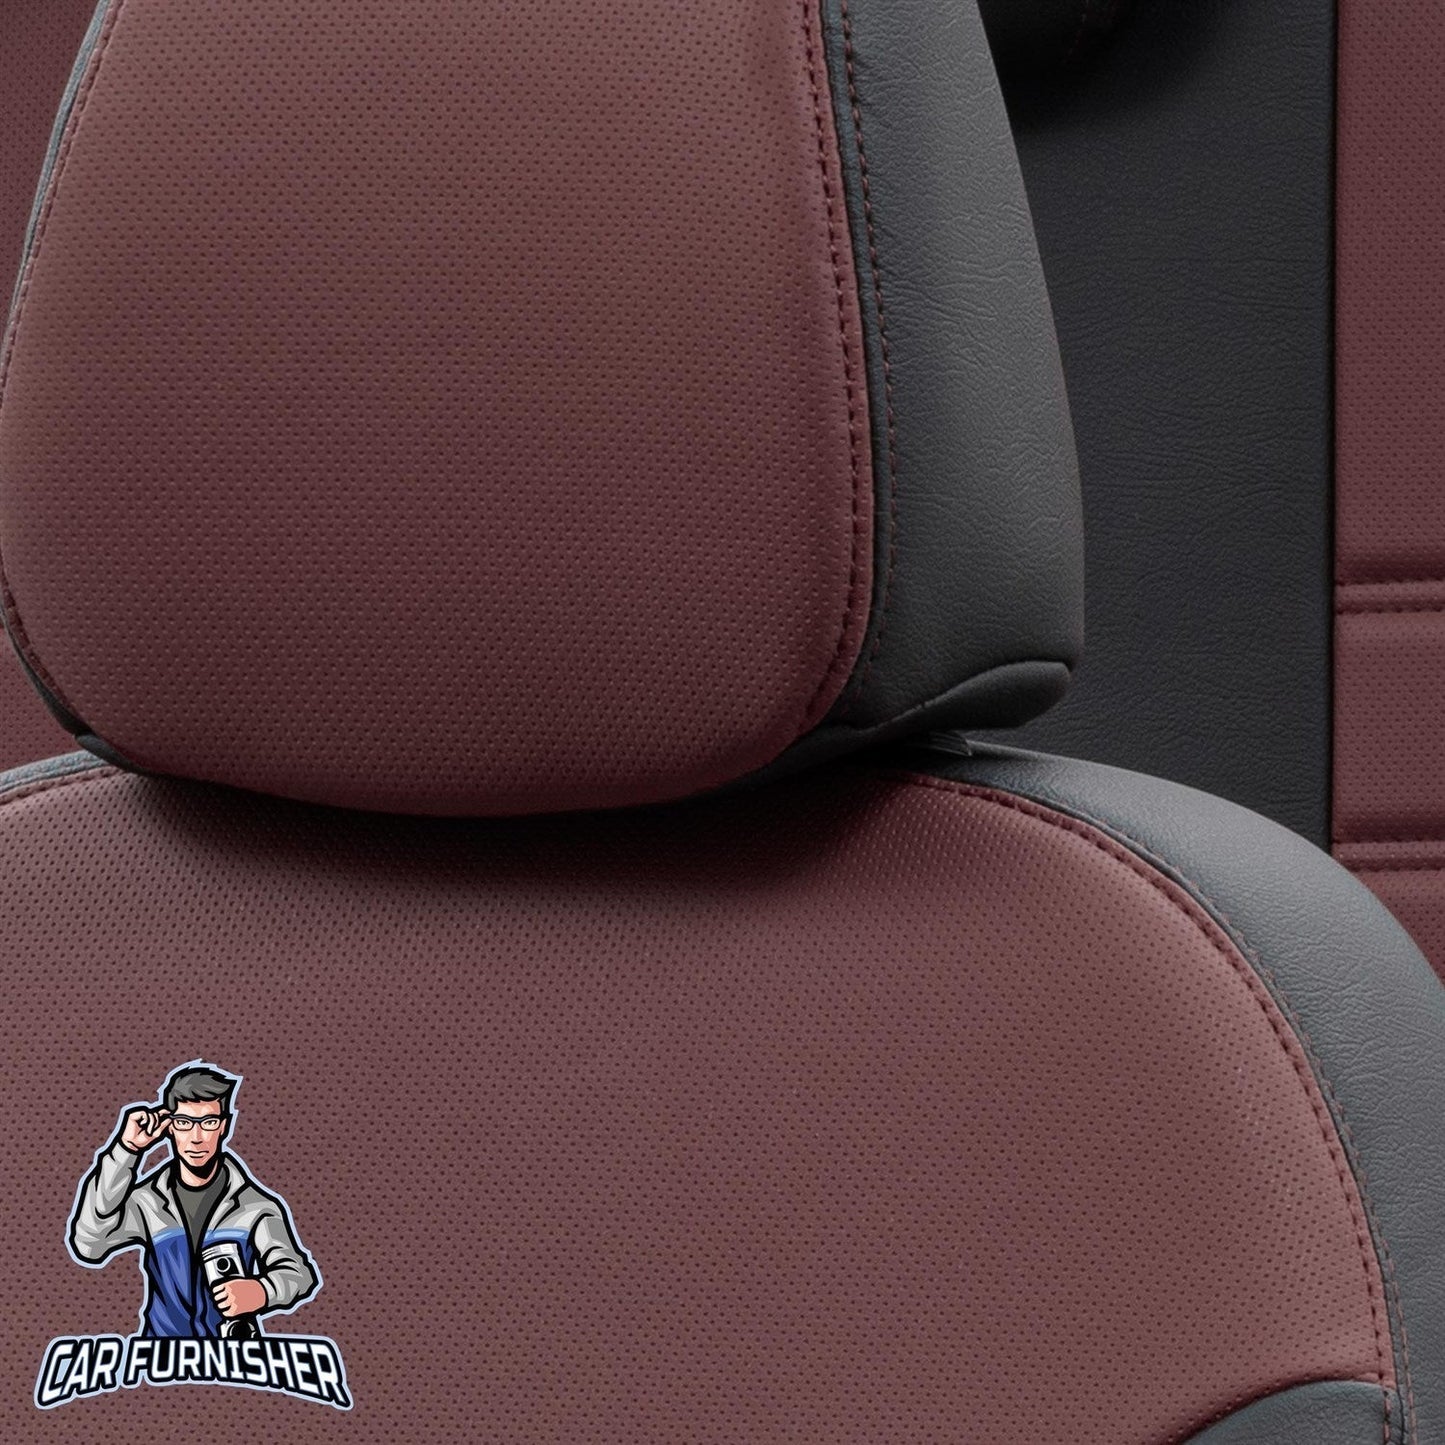 Ford Galaxy Seat Covers Istanbul Leather Design Burgundy Leather